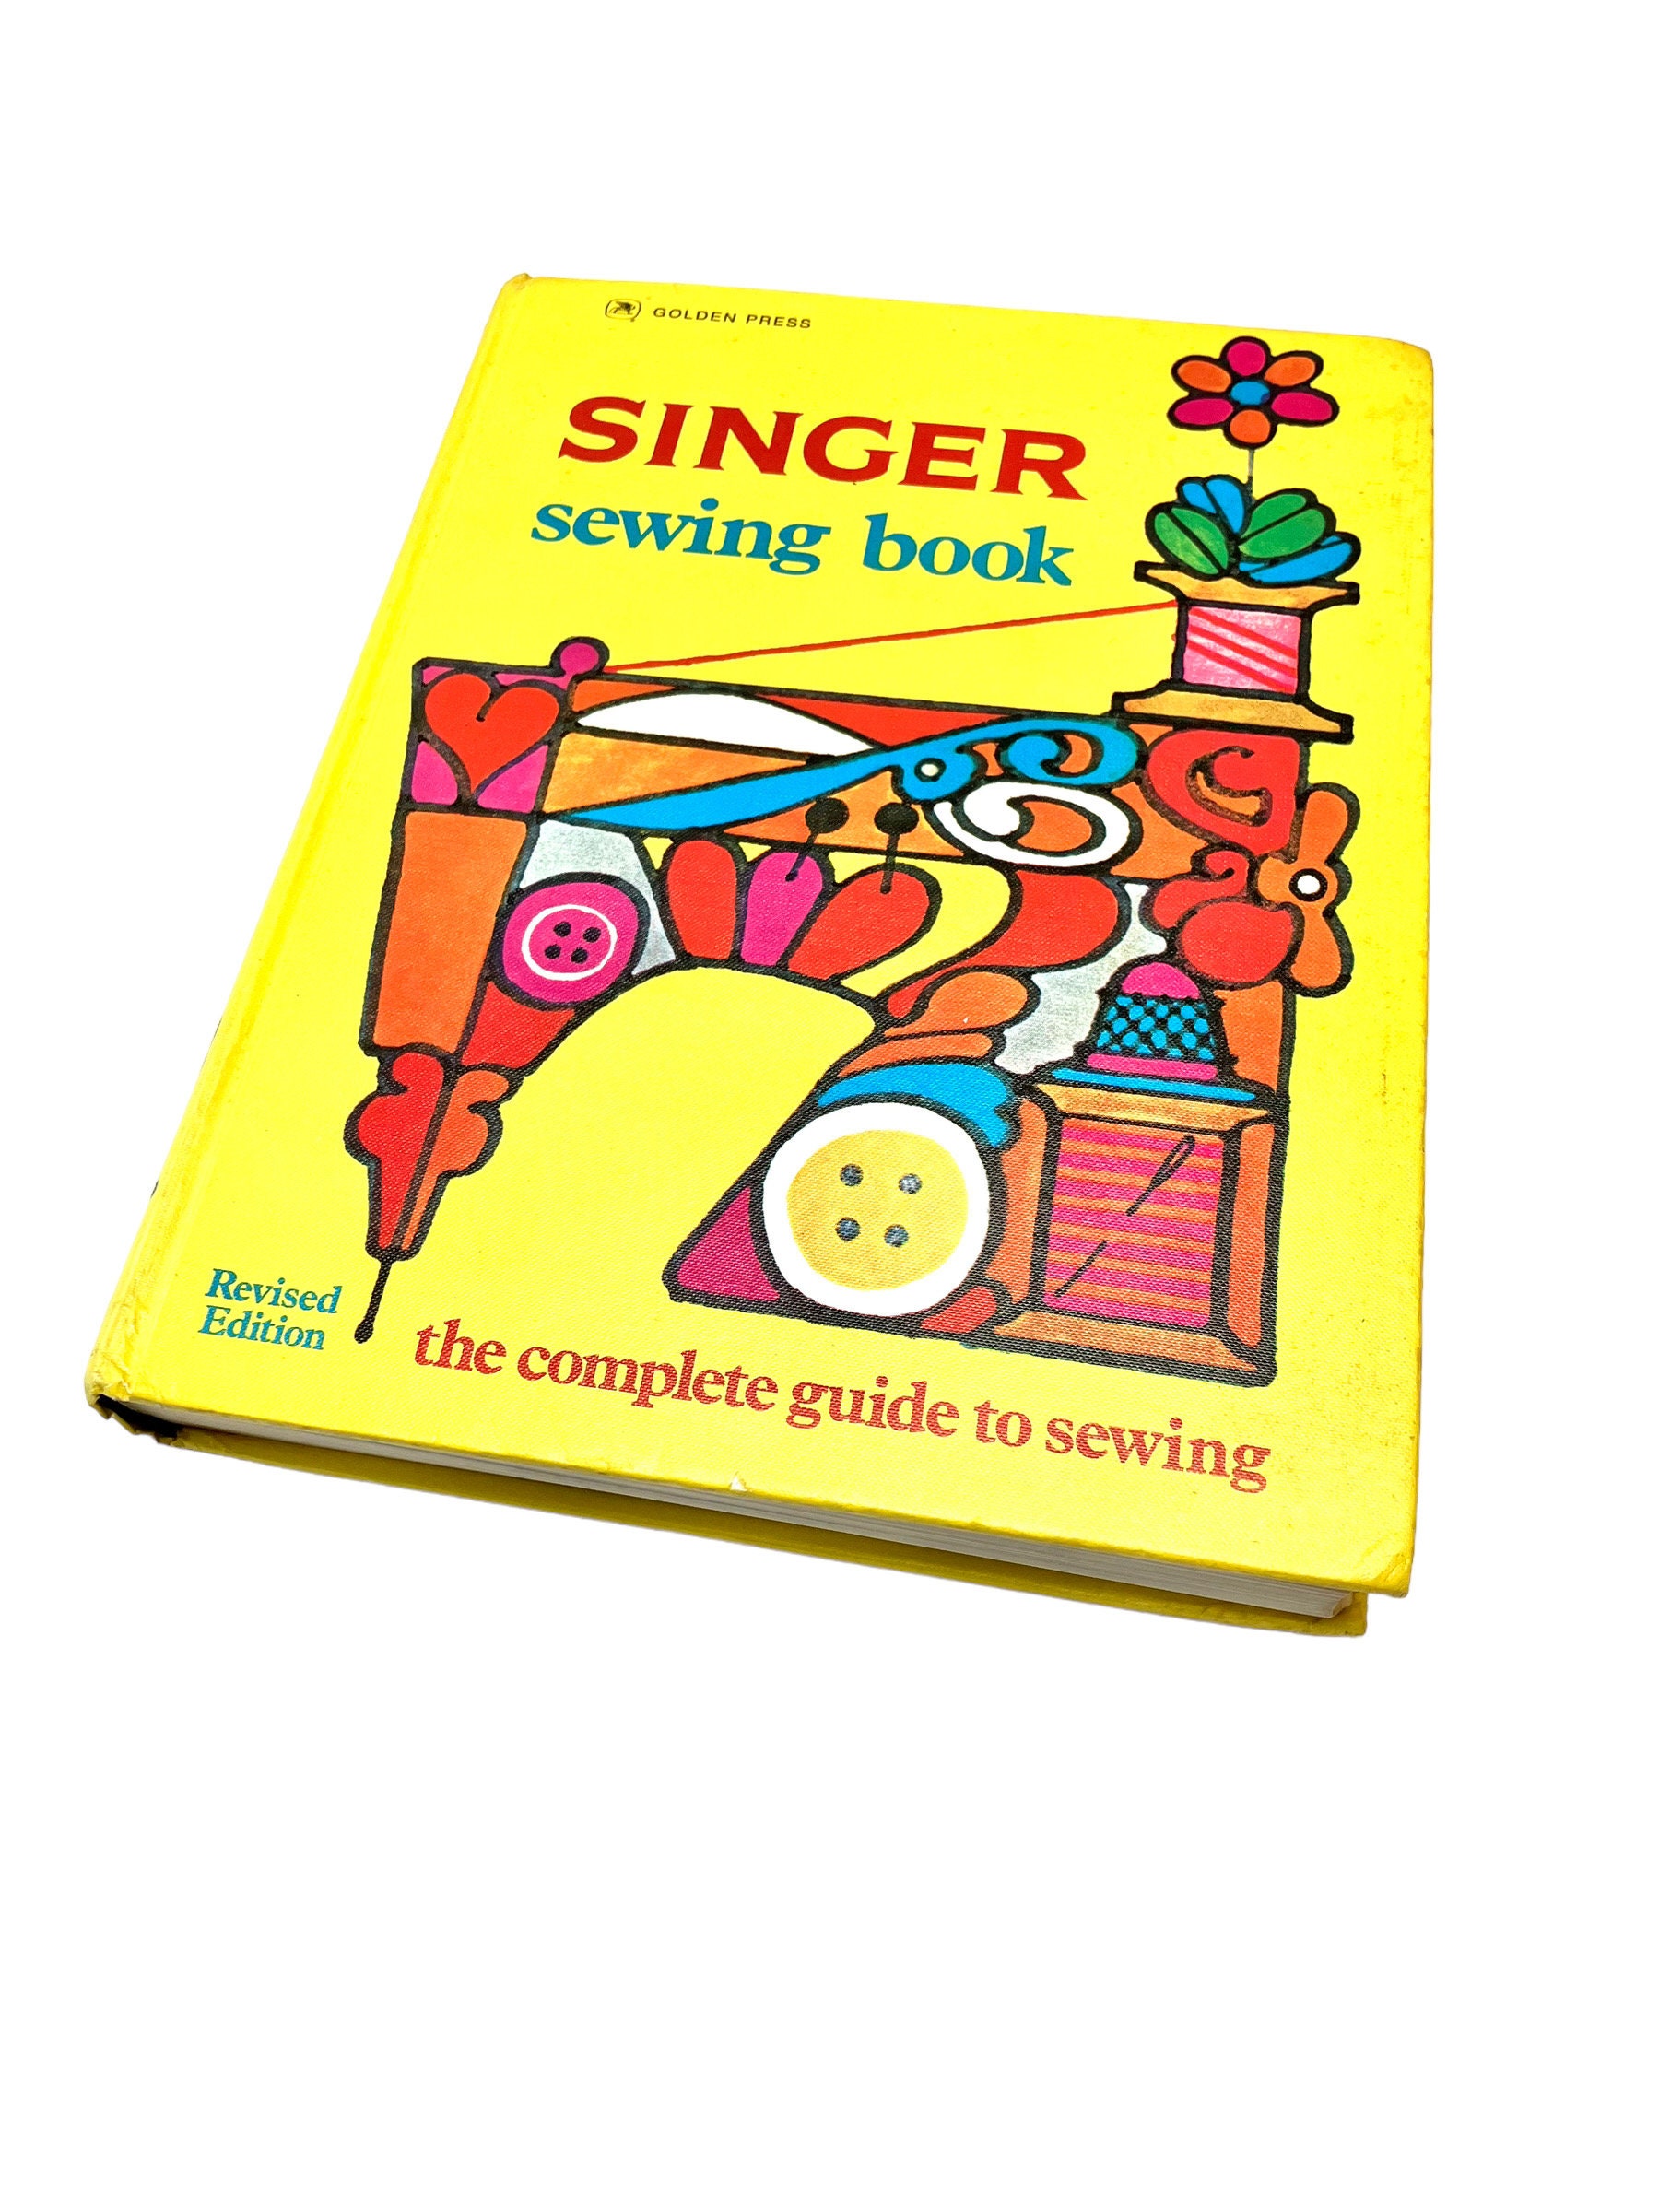 Singer Sewing Book: The Complete Guide to Sewing, Revised Edition